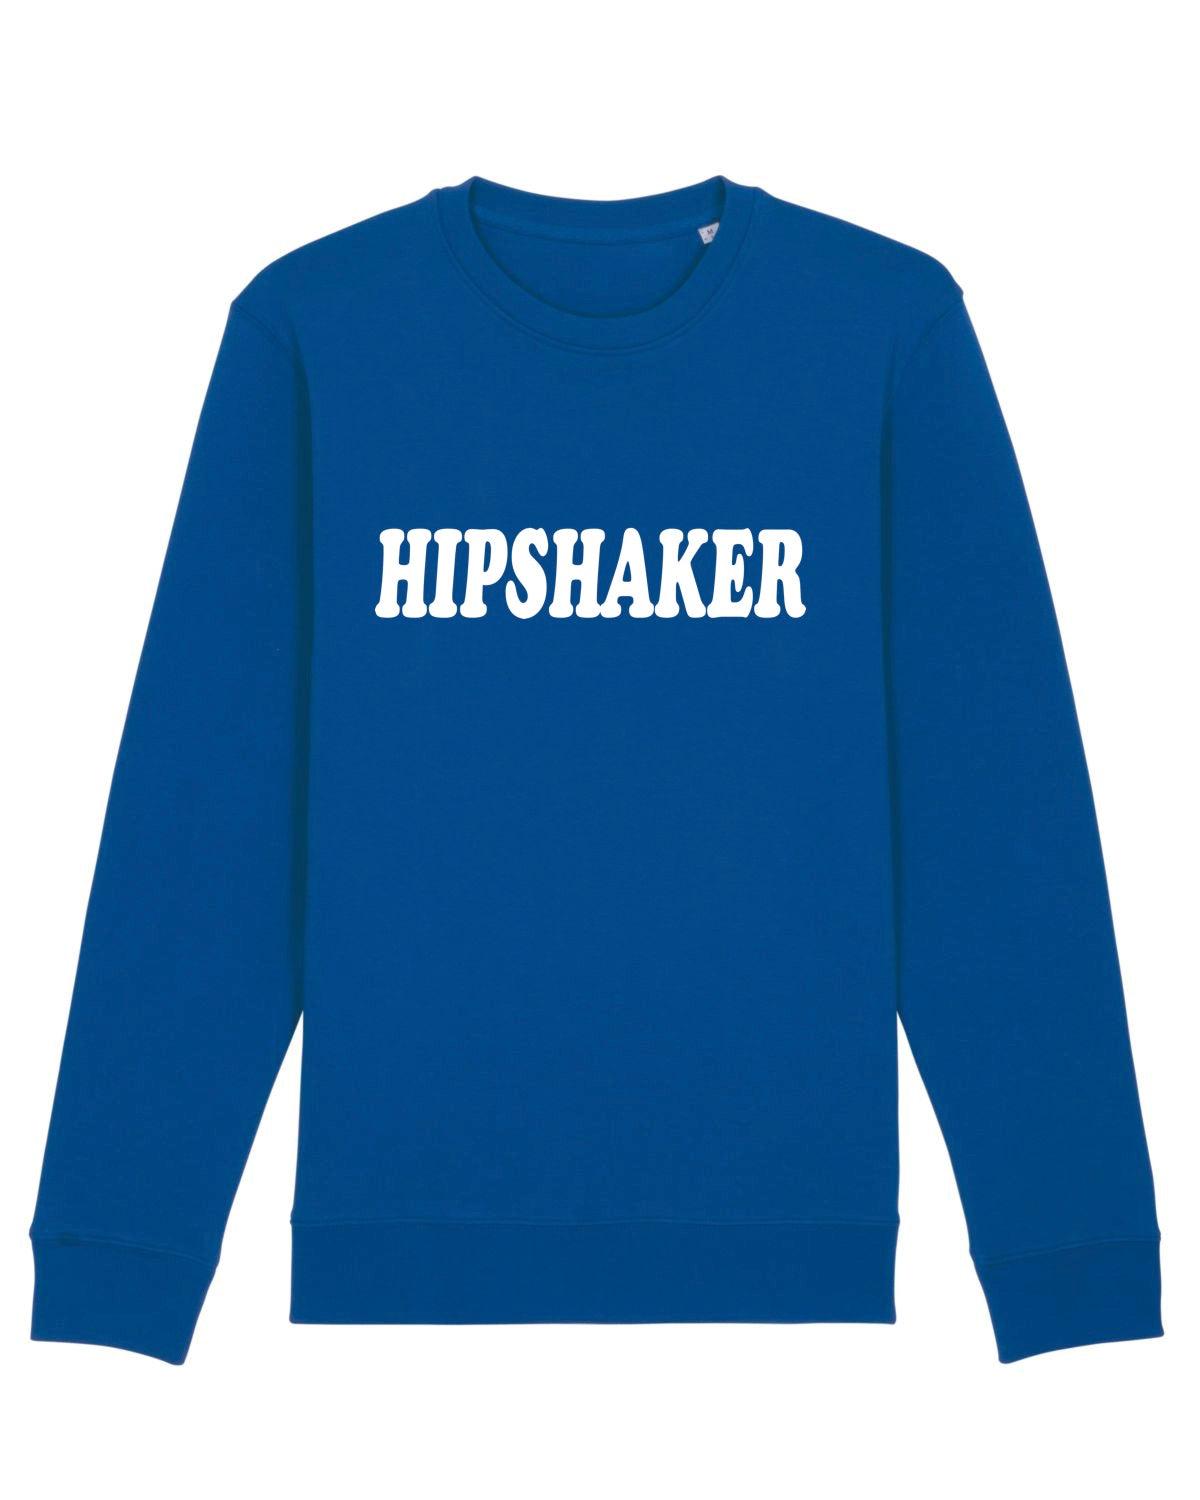 HIPSHAKER LOGO: Sweatshirt Official Merchandise of Hipshaker (3 Colour Options) - SOUND IS COLOUR